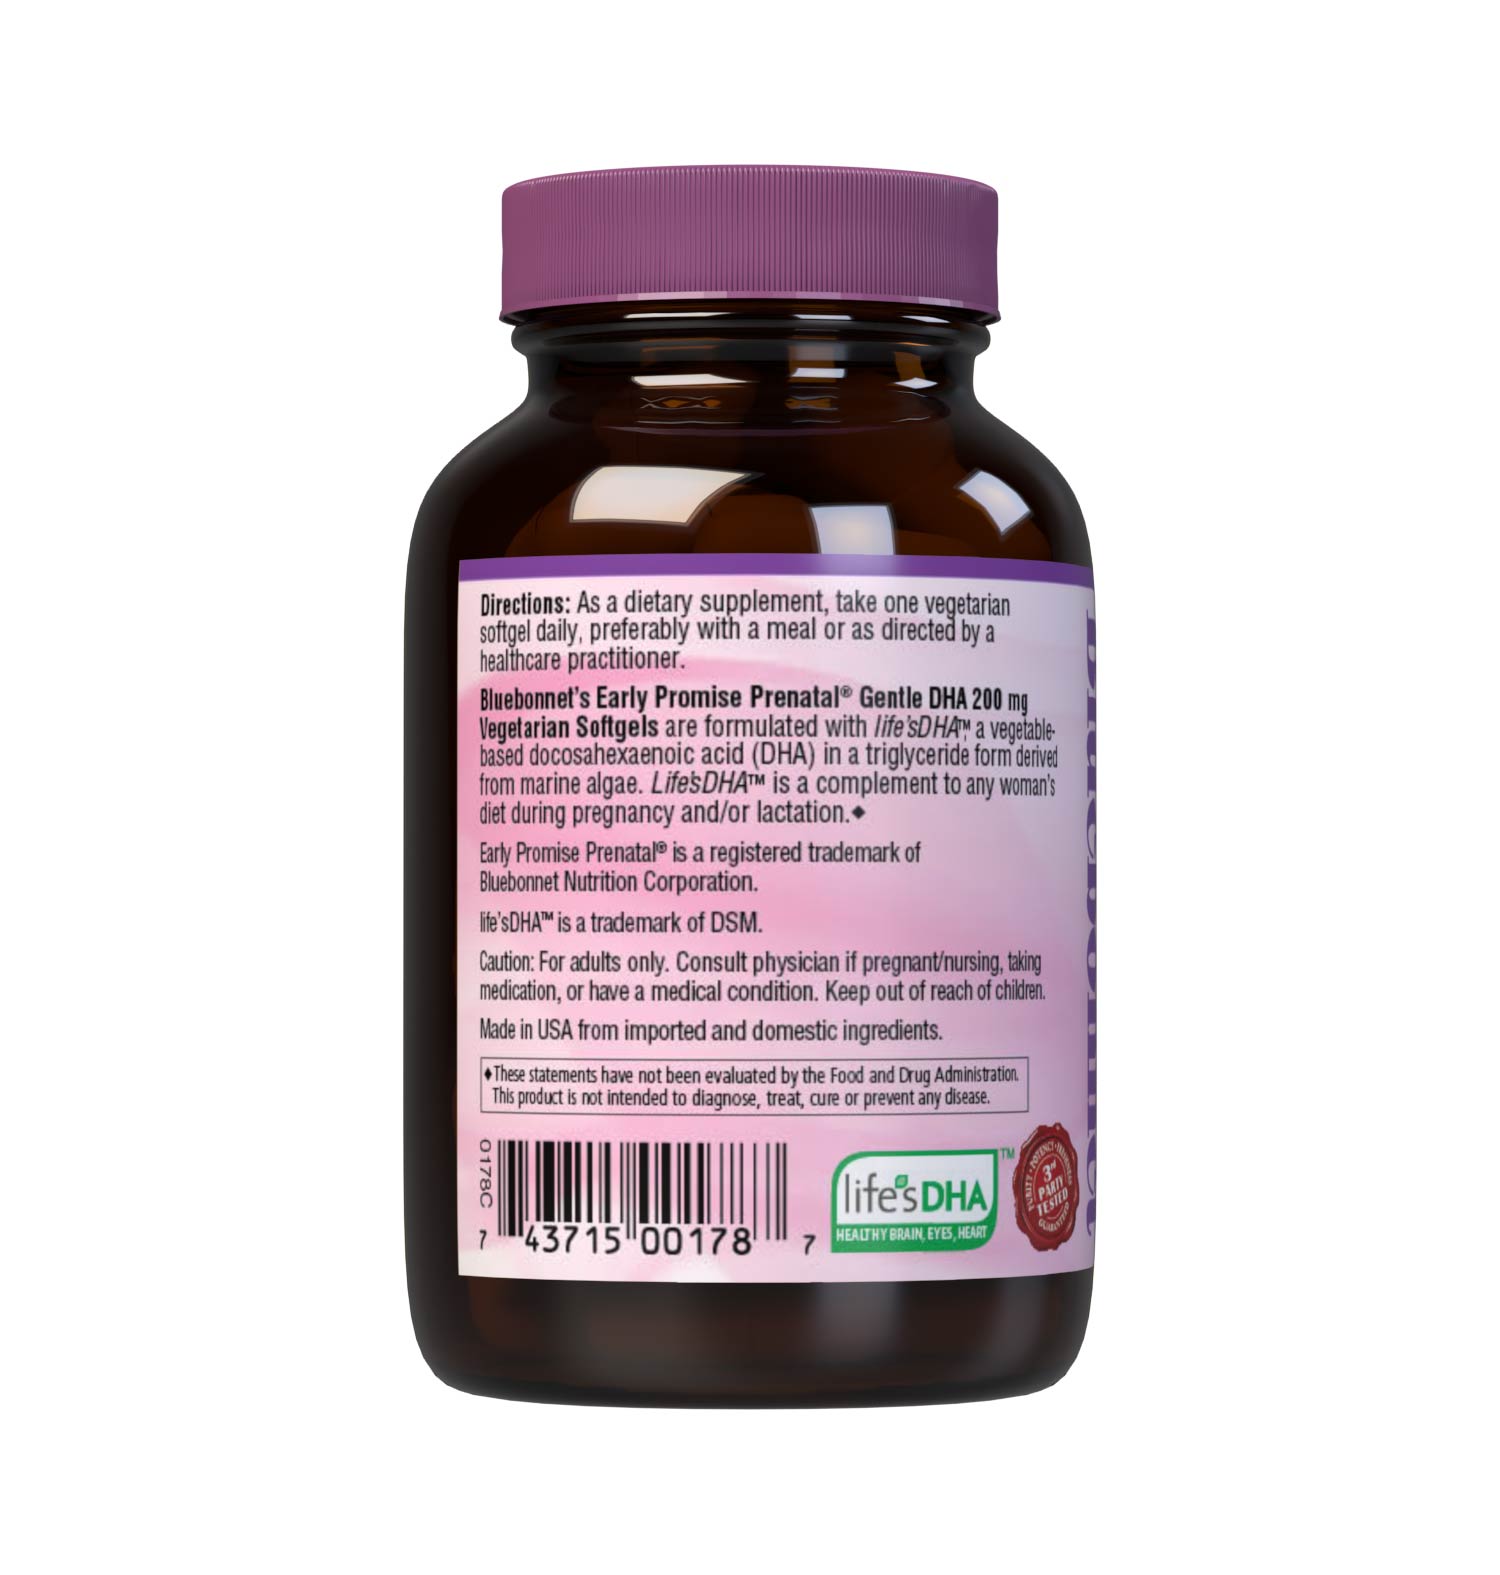 Early Promise Prenatal Gentle DHA 200 mg 30 Vegetarian Softgels are formulated with life'sDHA, a vegetable-based docosahexaenoic acid (DHA) in a triglyceride form derived from marine algae. Life'sDHA™ is the perfect complement to any woman's diet during pregnancy and/or lactation. Description panel. #size_30 count